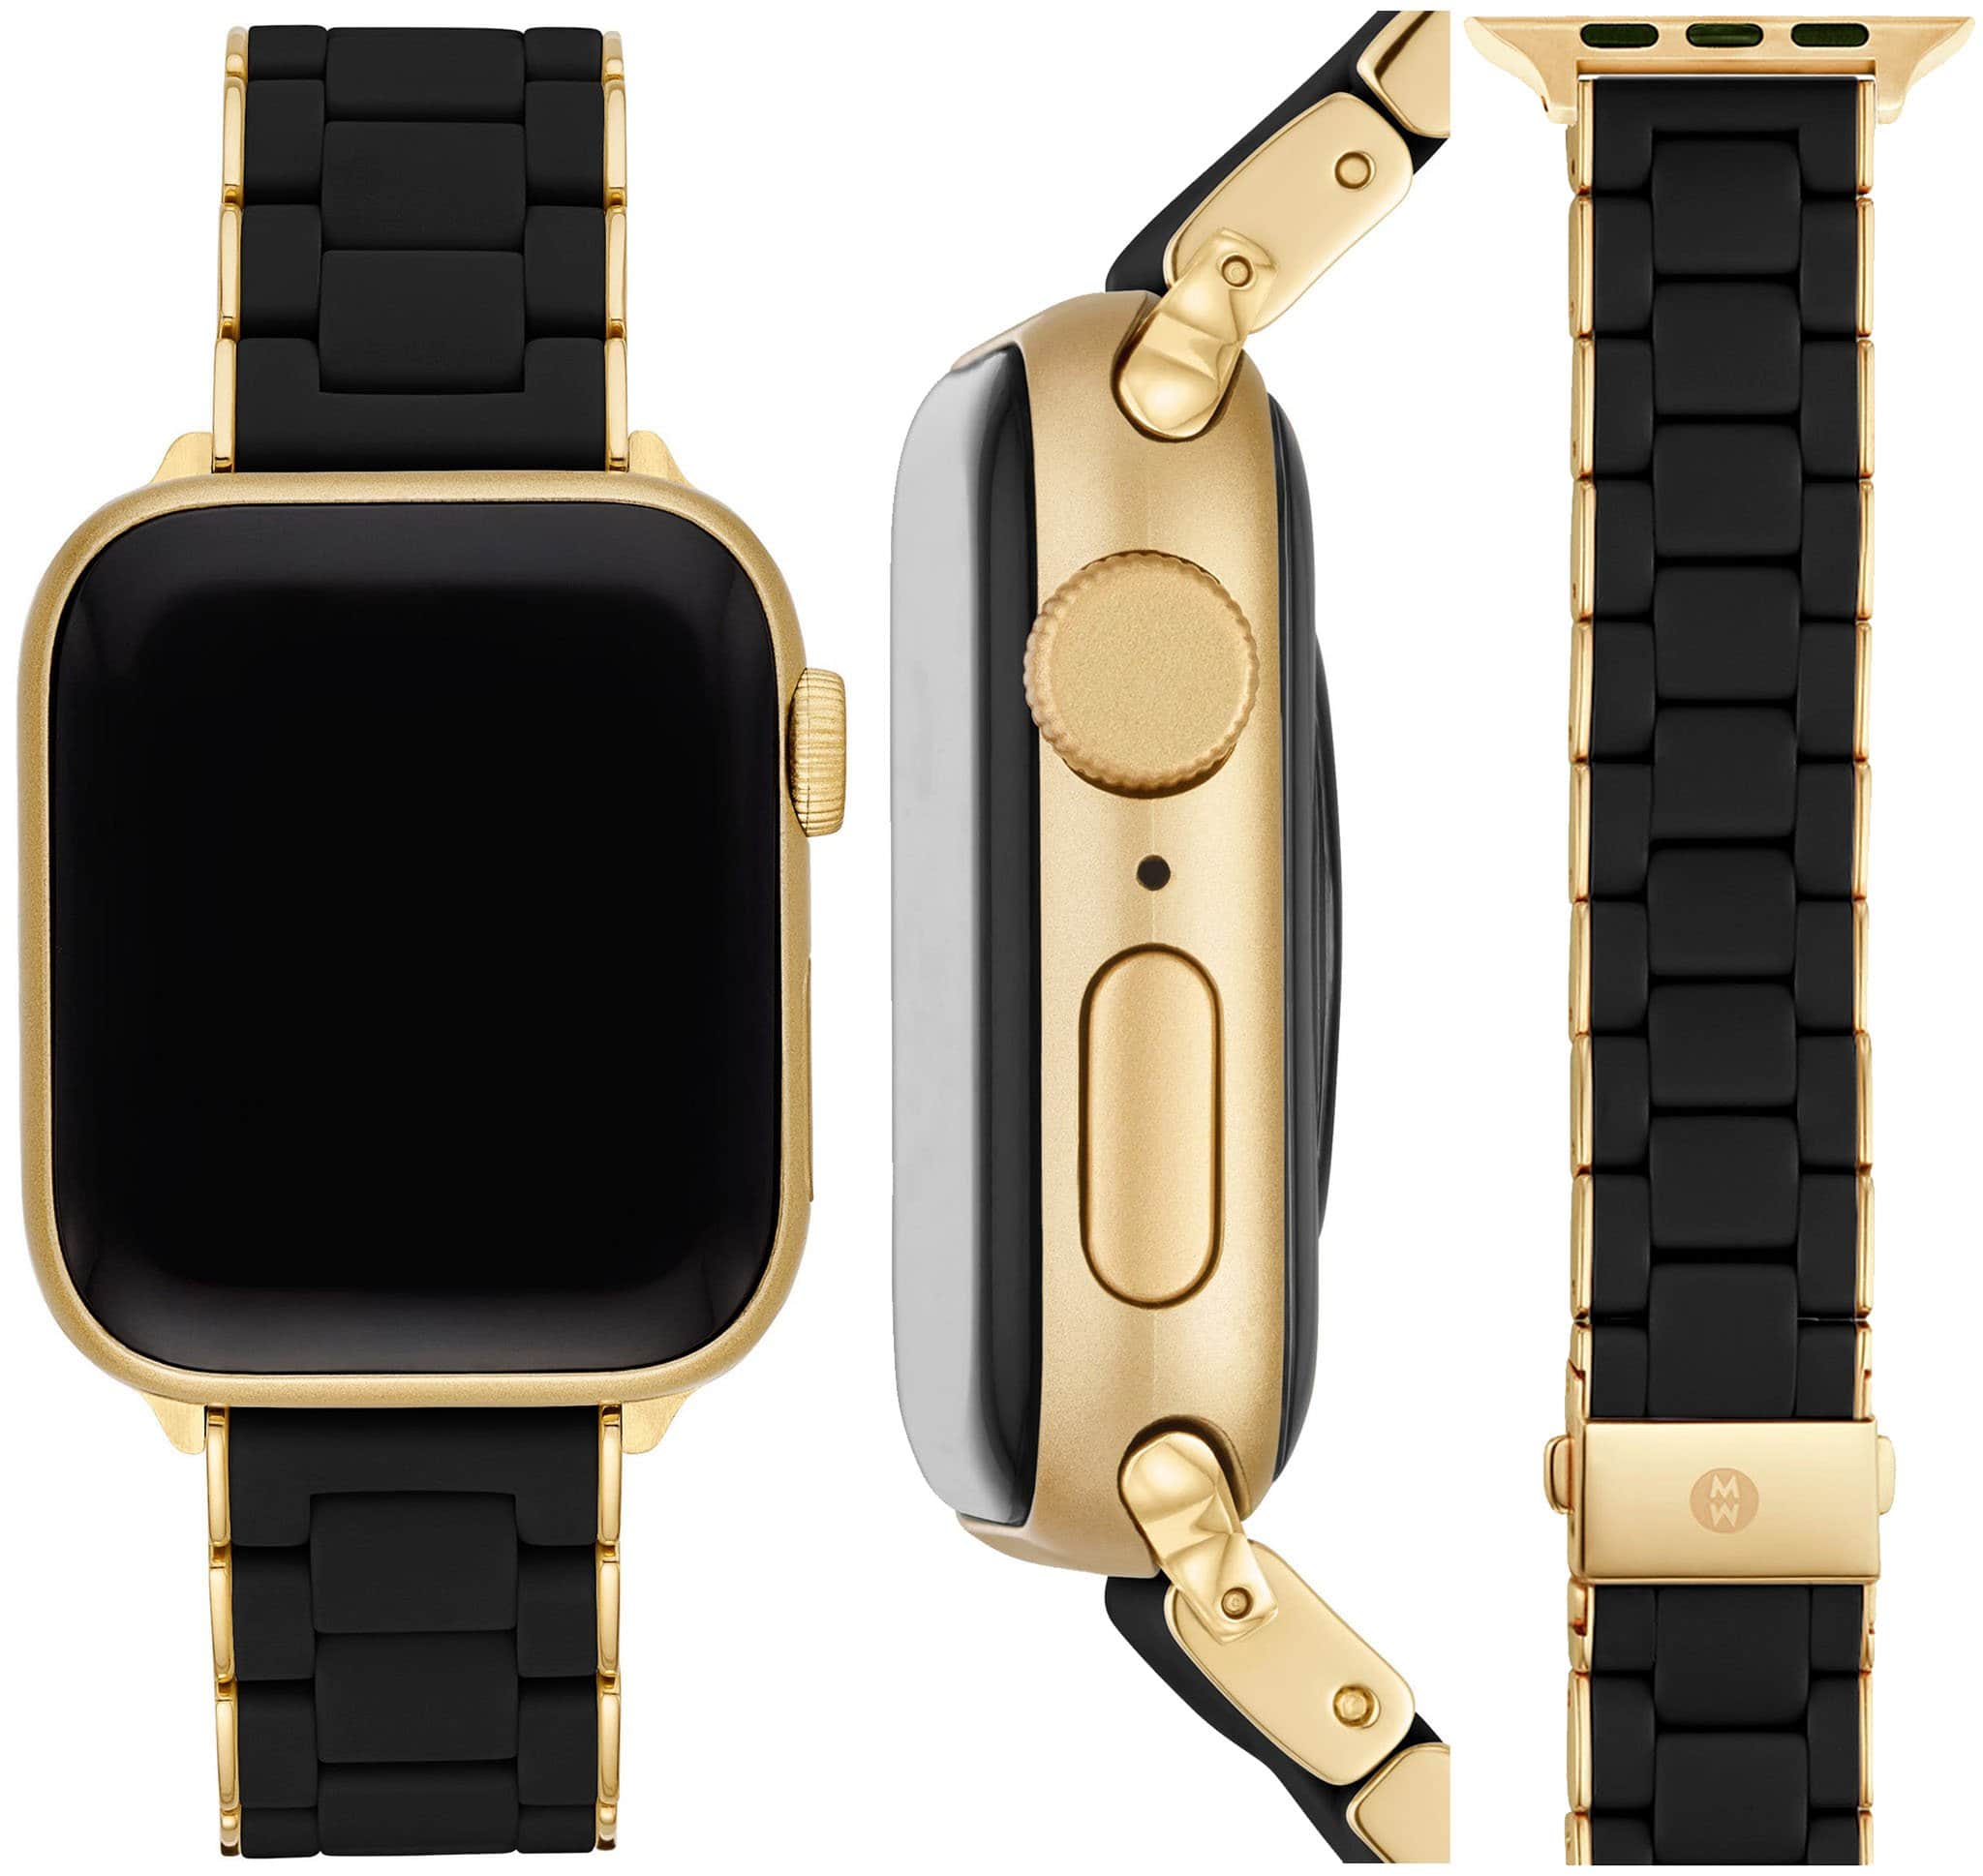 A silicone-wrapped stainless steel bracelet Apple Watch strap edged in gold-tone plating with a push-button box-clasp closure from watch brand Michele